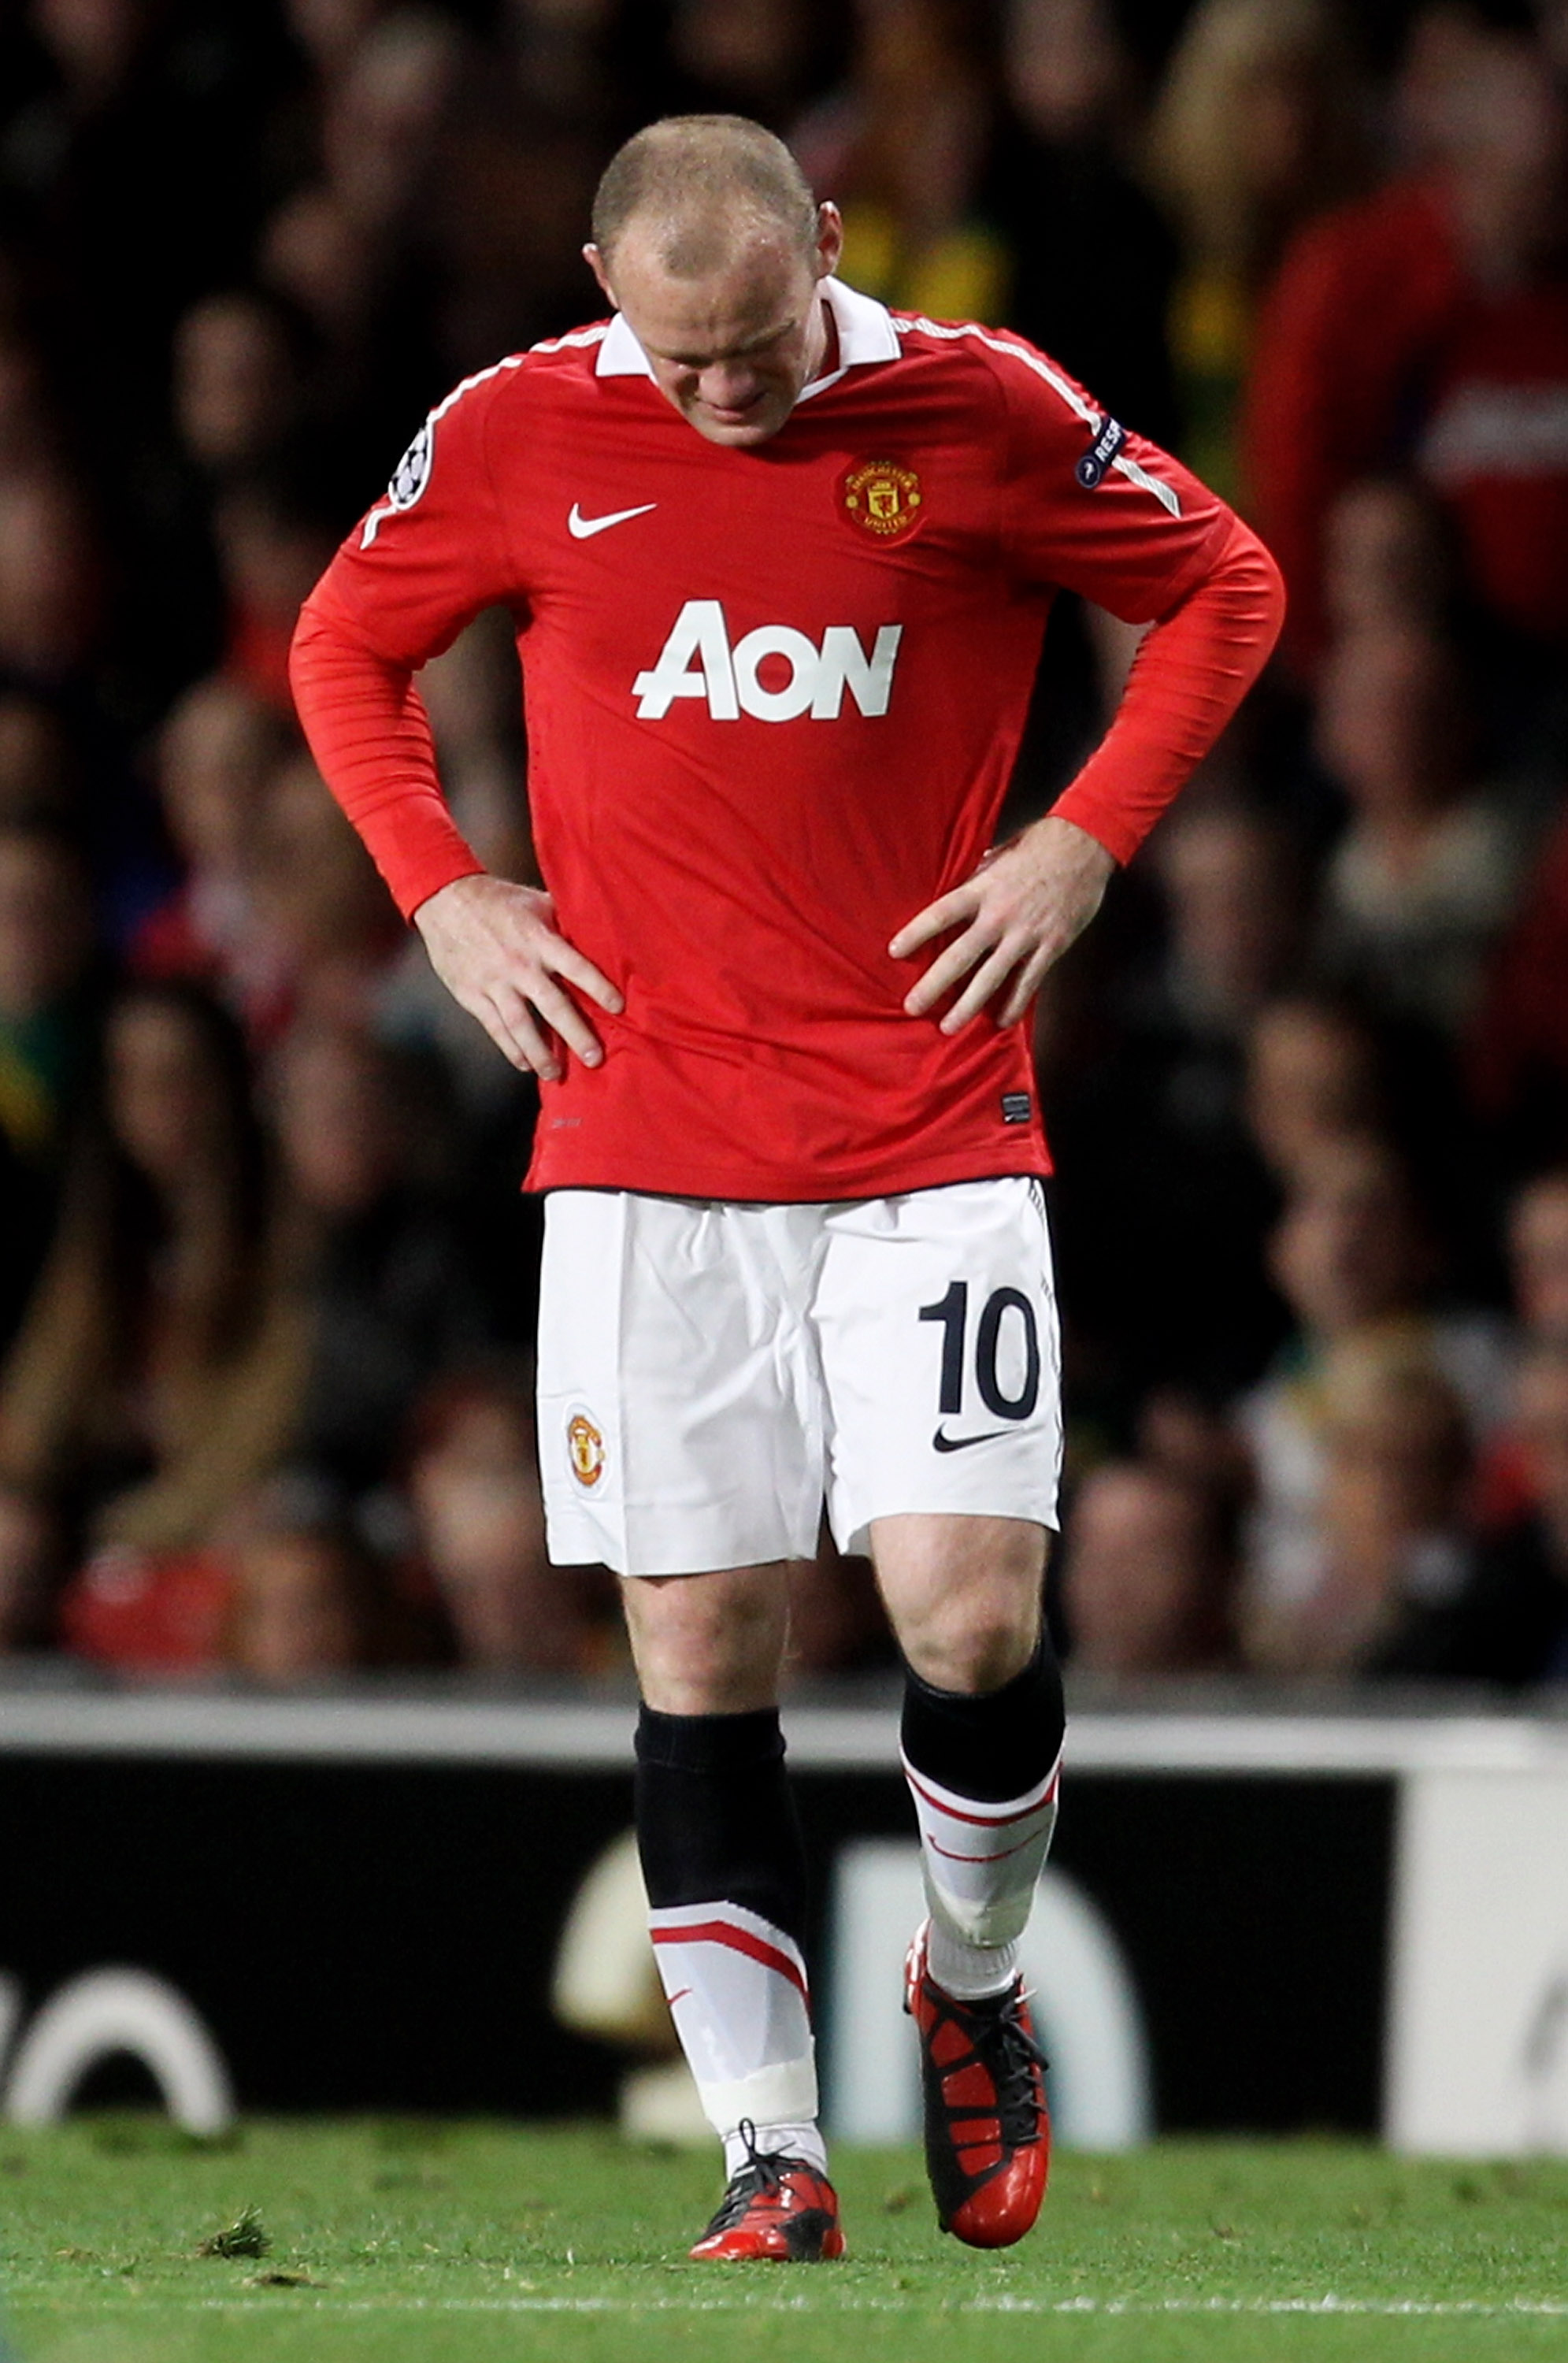 MANCHESTER, ENGLAND - SEPTEMBER 14:  Wayne Rooney of Manchester United grimaces in pain during the UEFA Champions League Group C match between Manchester United and Rangers at Old Trafford on September 14, 2010 in Manchester, England.  (Photo by Alex Live